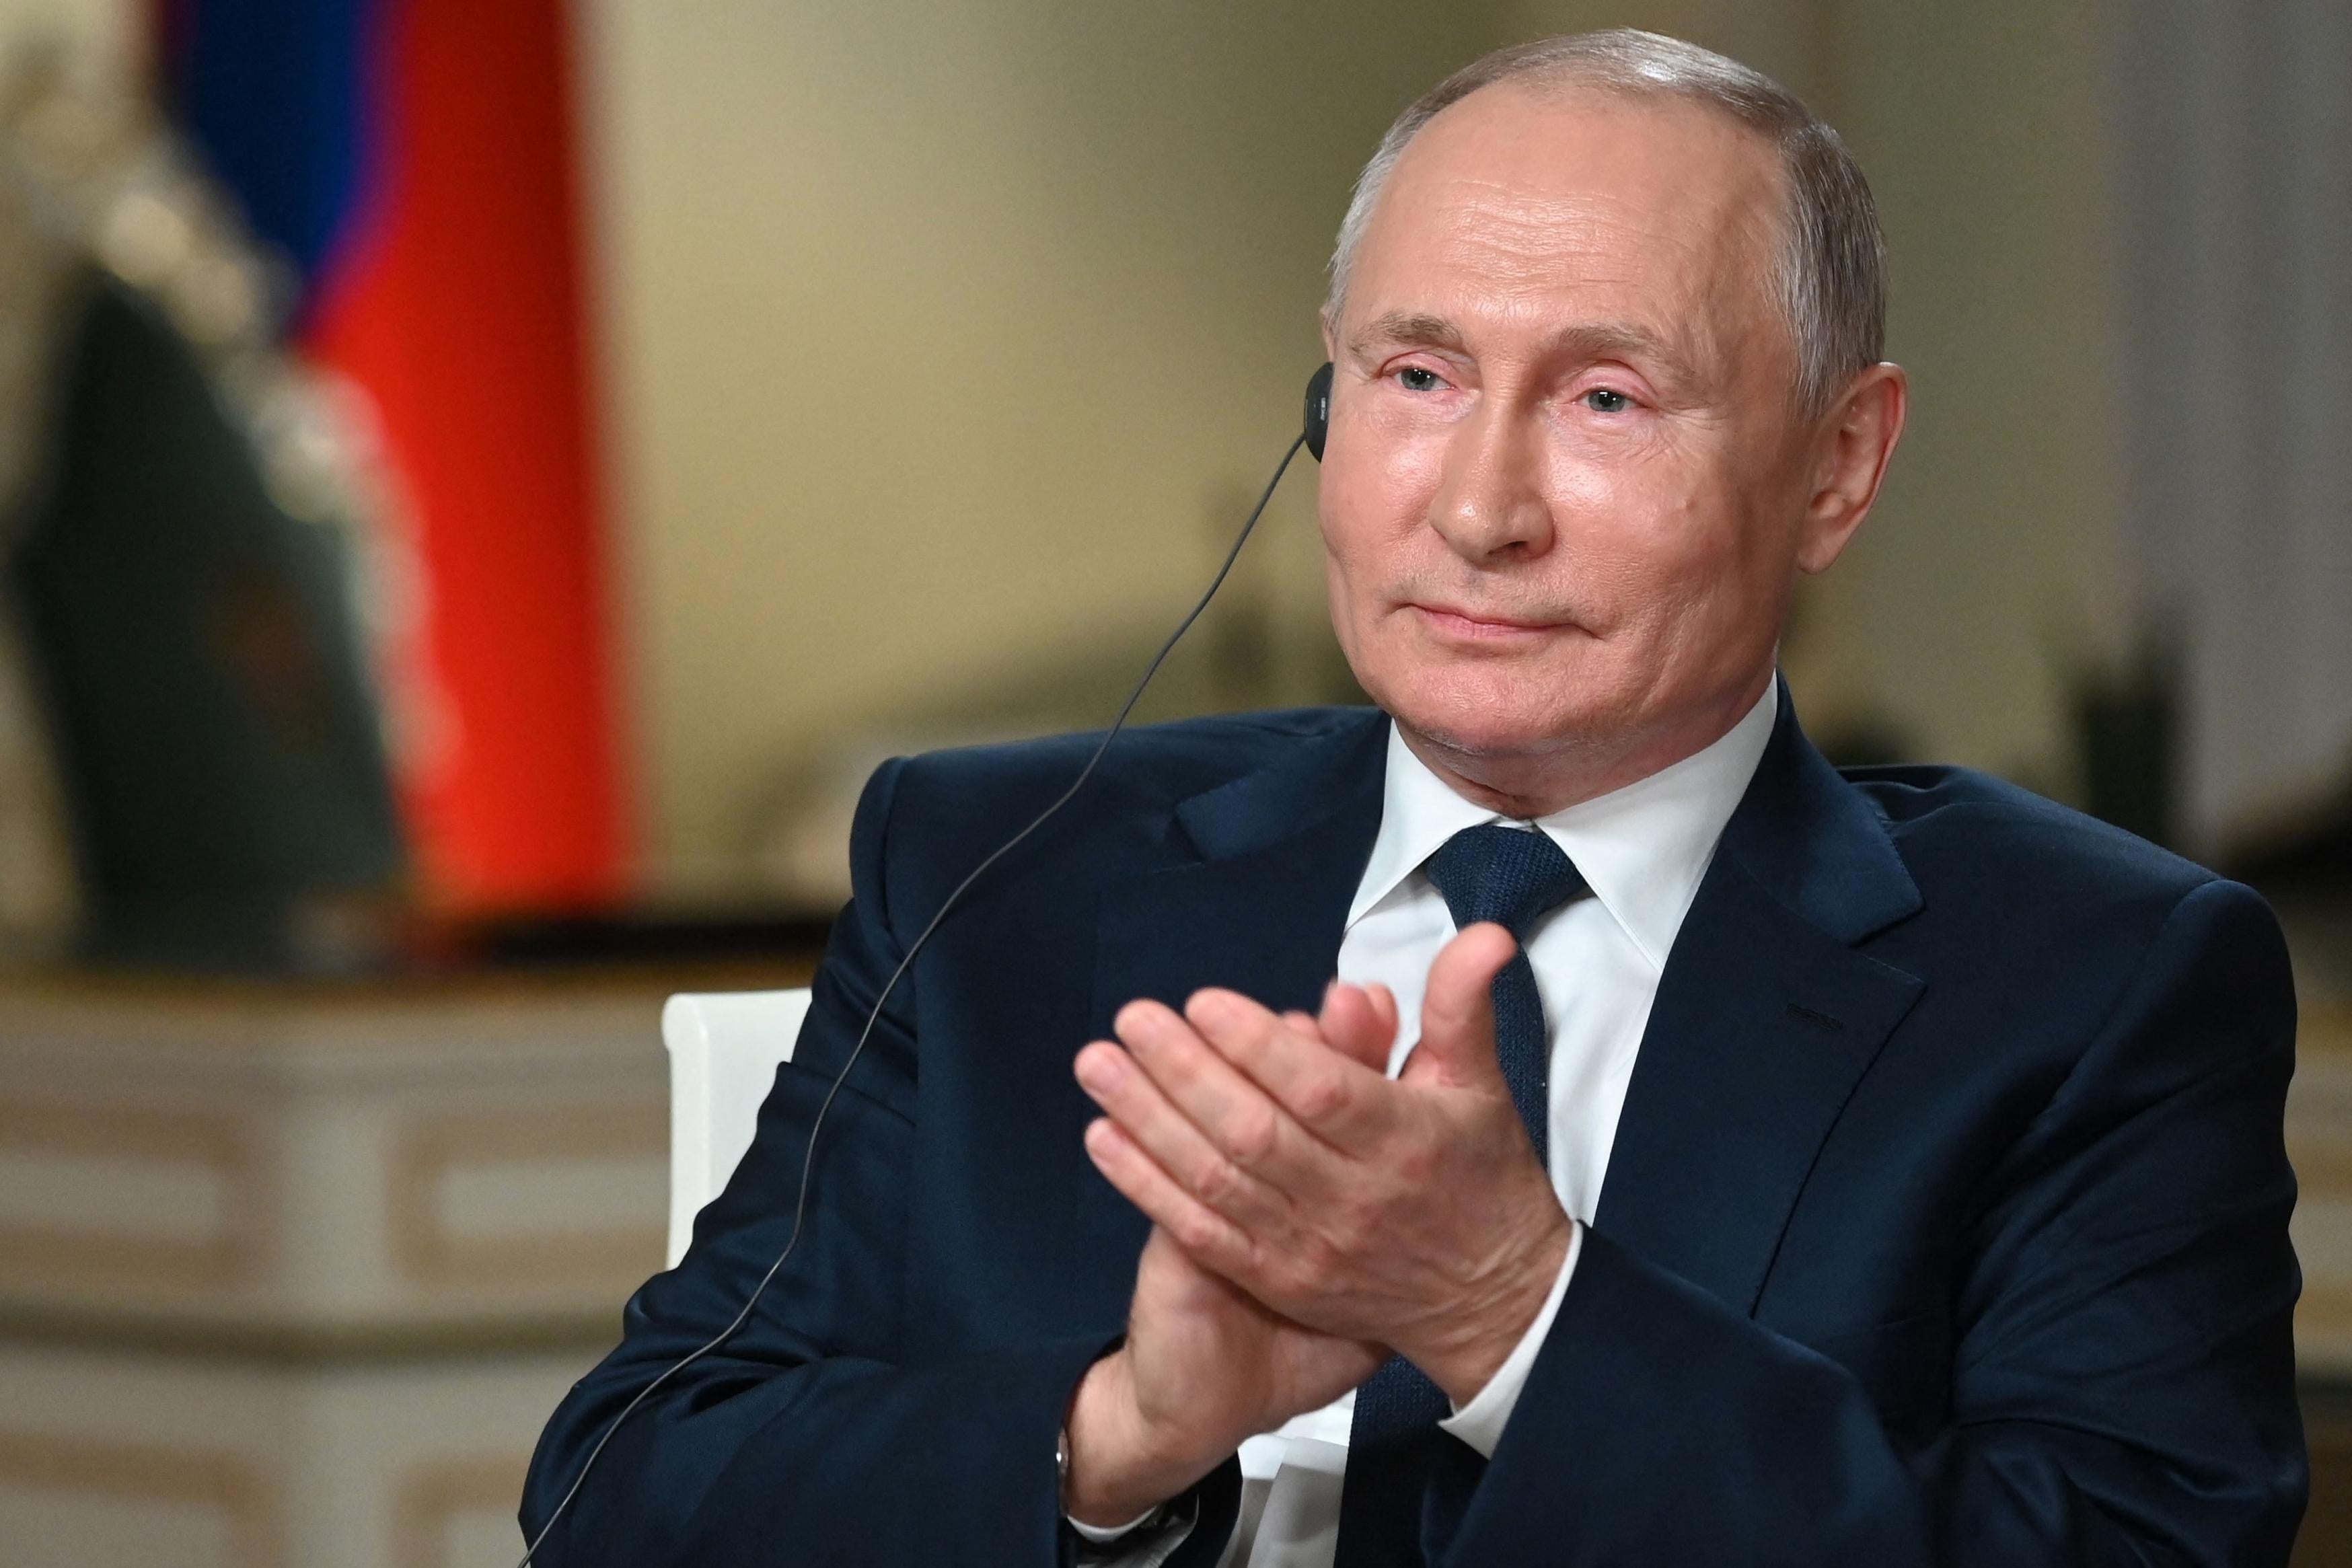 Putin holds his palms together as he wears an earpiece.